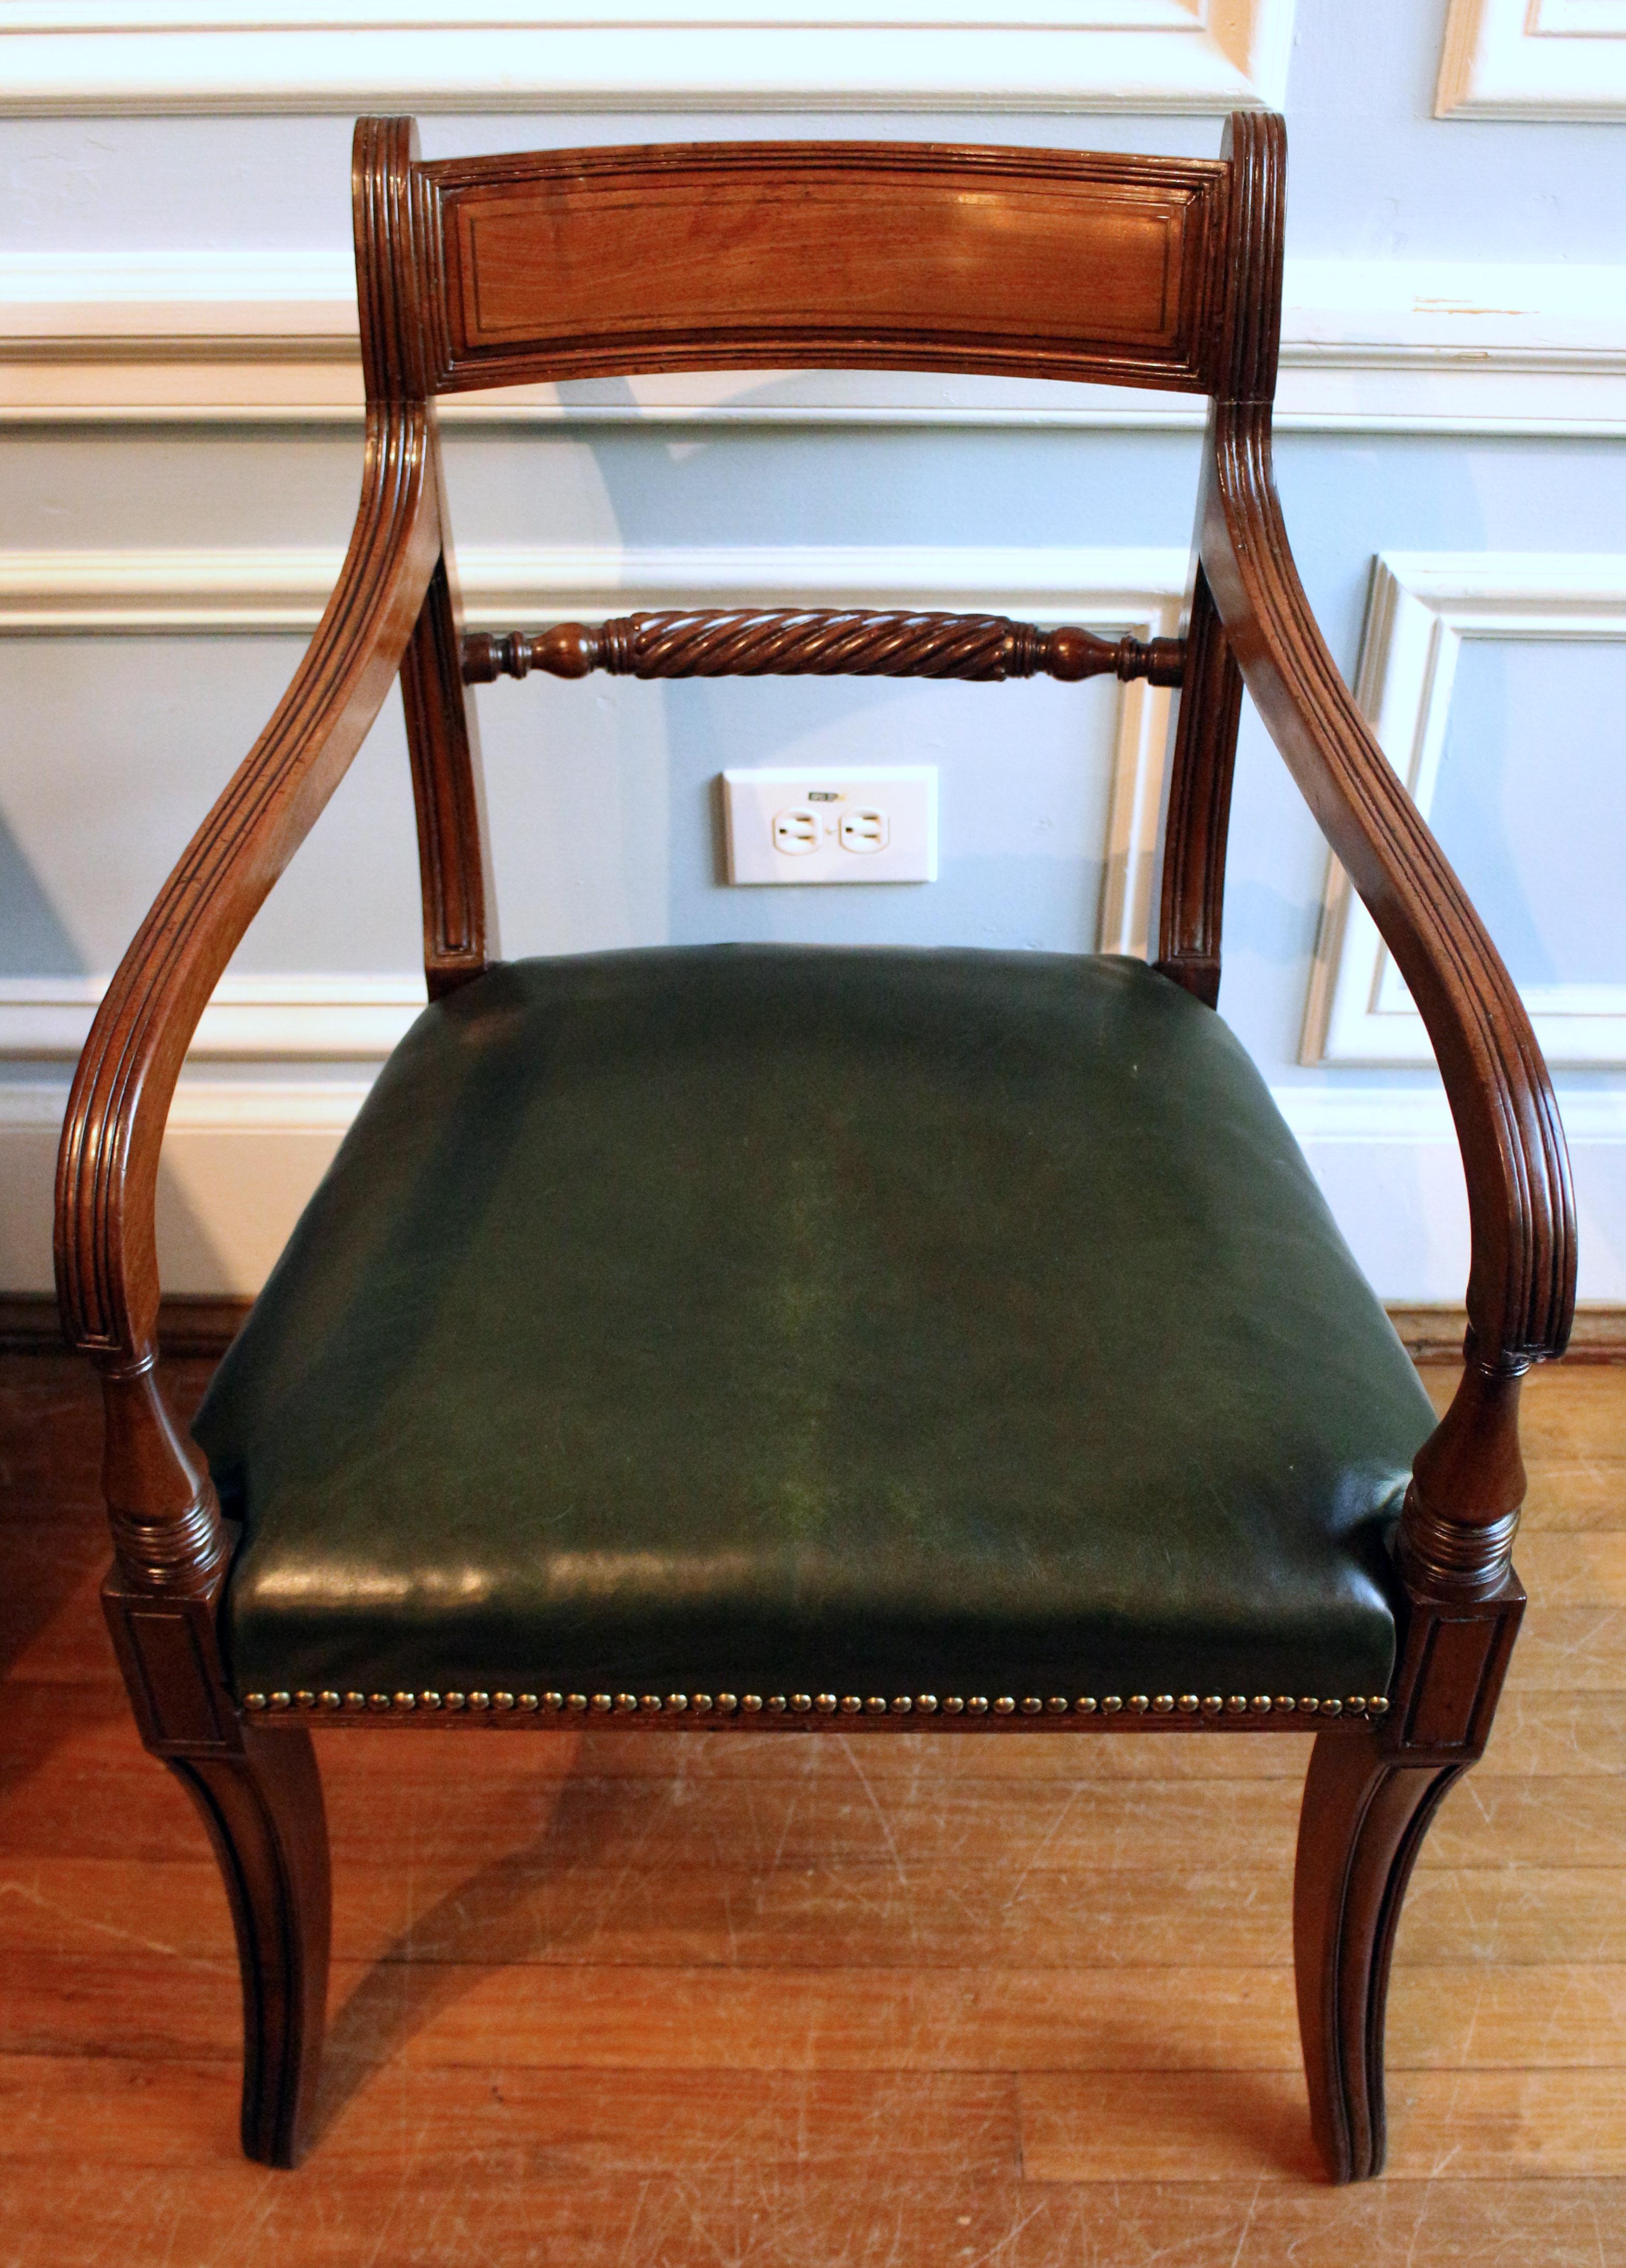 circa 1815 English Regency armchair with dark green upholstery. The reeded motif appears as a stylish contrast to the paneled motifs. Saber legs. 
34